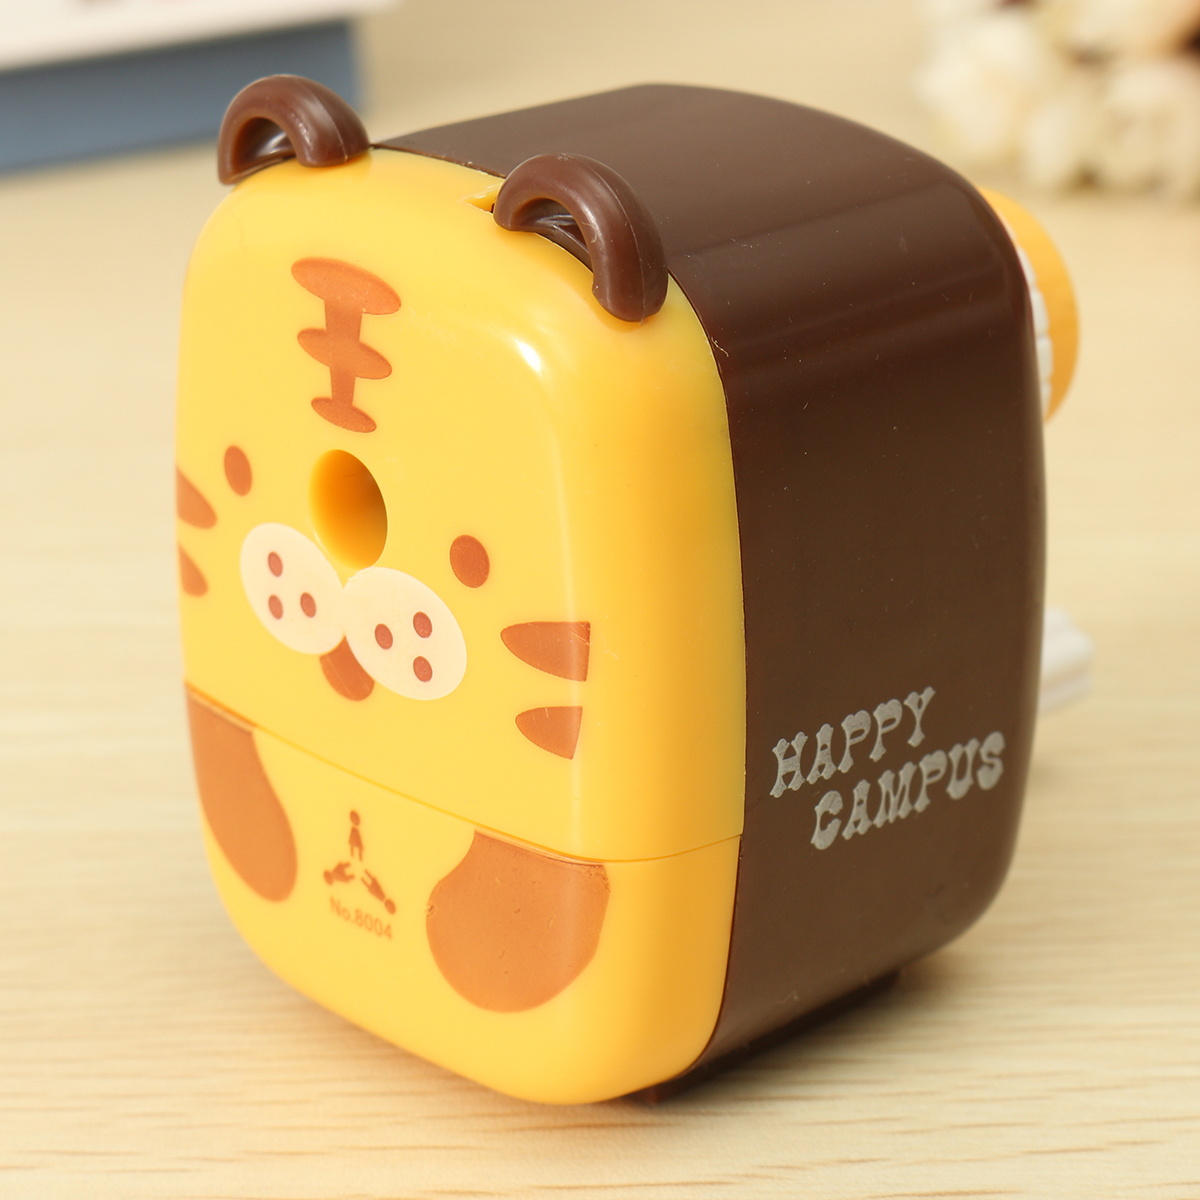 Practical Tiger Panda Animal Shaped Mini Manual Pencil Sharpener Gifts Office School Students Stationery Supplies—5